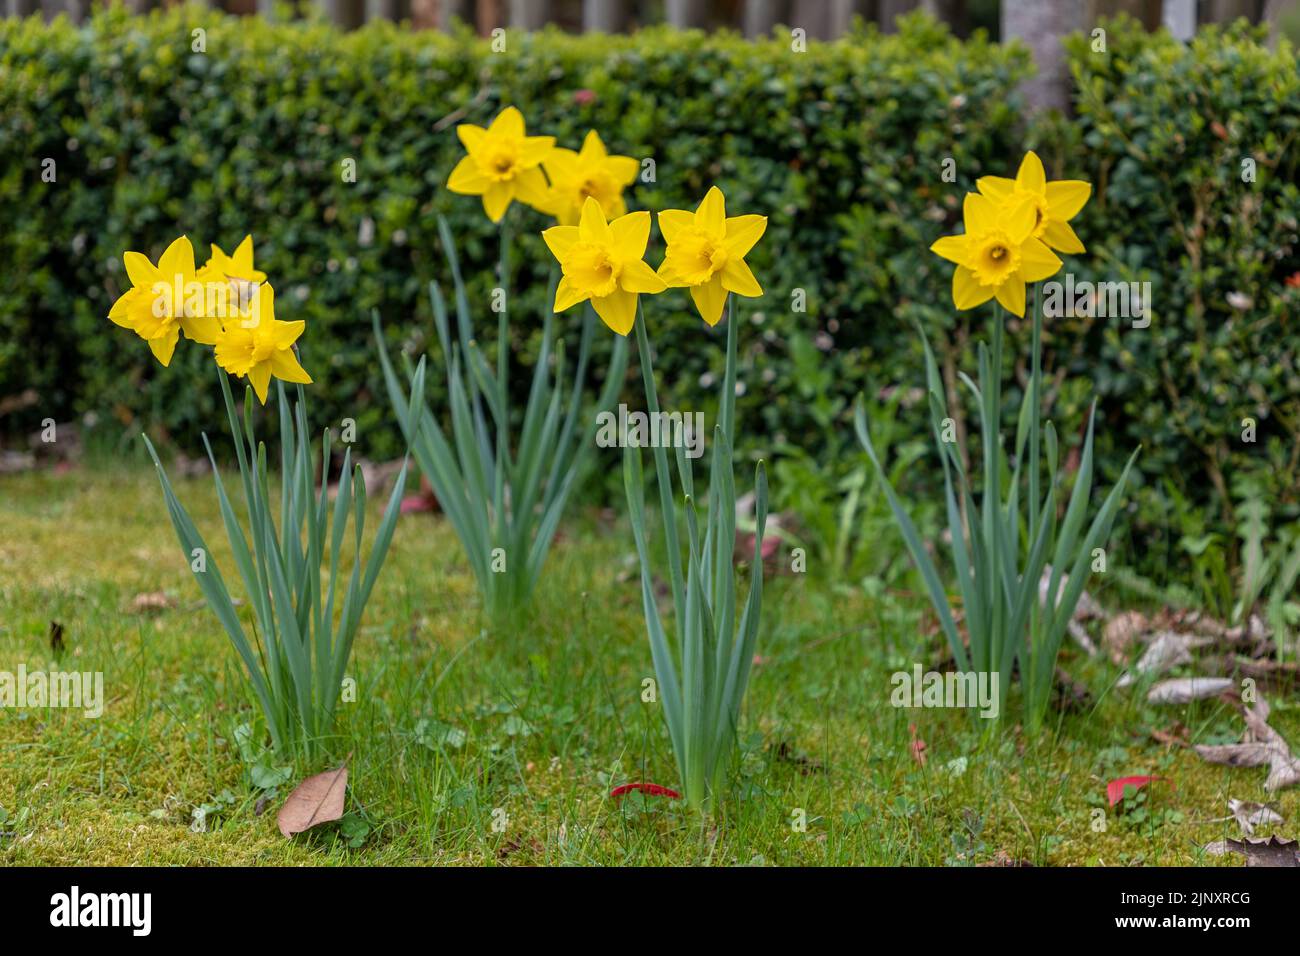 Selective focus on Daffodil flowers growing on a lawn during springtime. Daffodil is also known as Narcissus Stock Photo